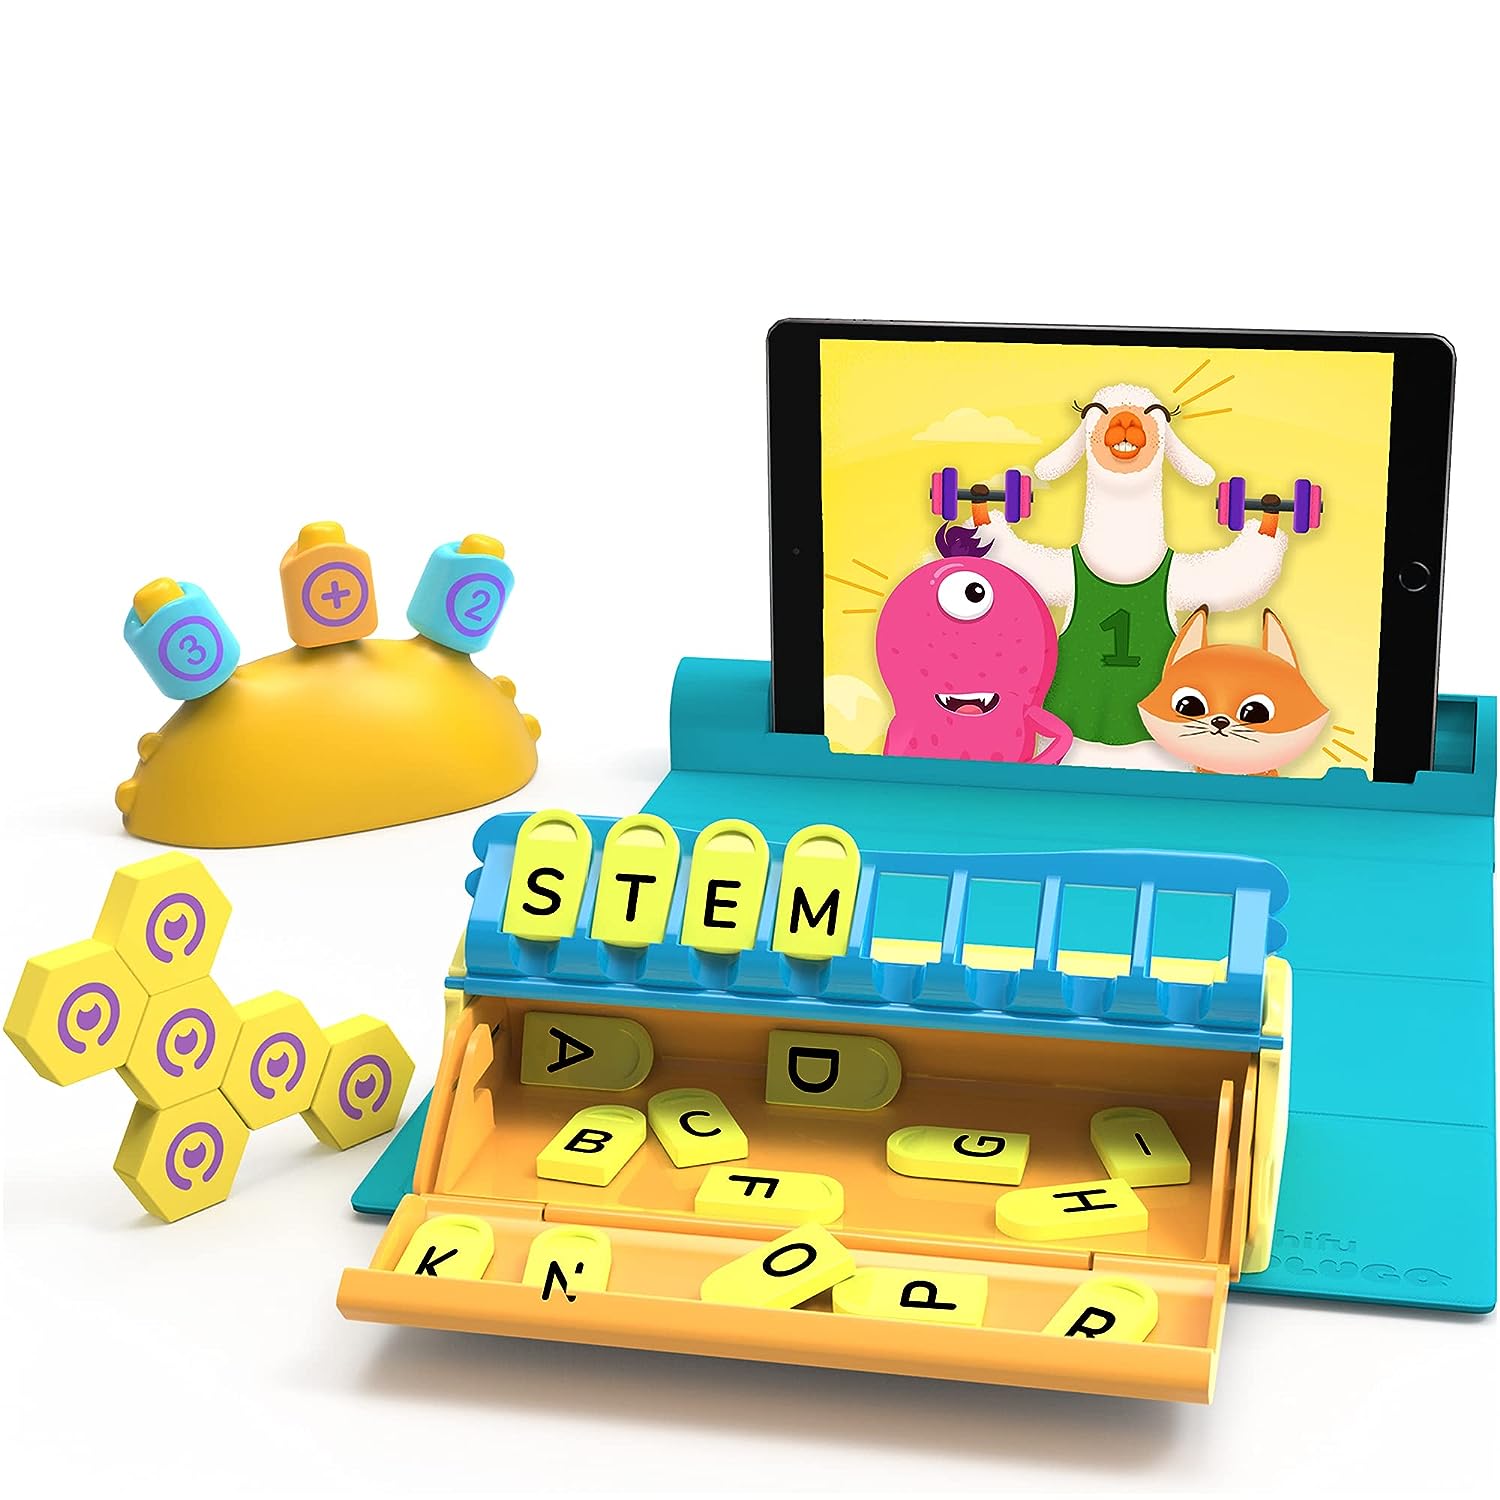 Shifu Plugo Stem Pack by Playshifu-Count,Letters&Link (3In1)|Math,Words,Magnetic Blocks,Puzzles|4-10 Years Stem Toys|Gift Boys&Girls (Works with Ipads,iPhones,Samsung Tabs,Kindle Fire),Multicolor